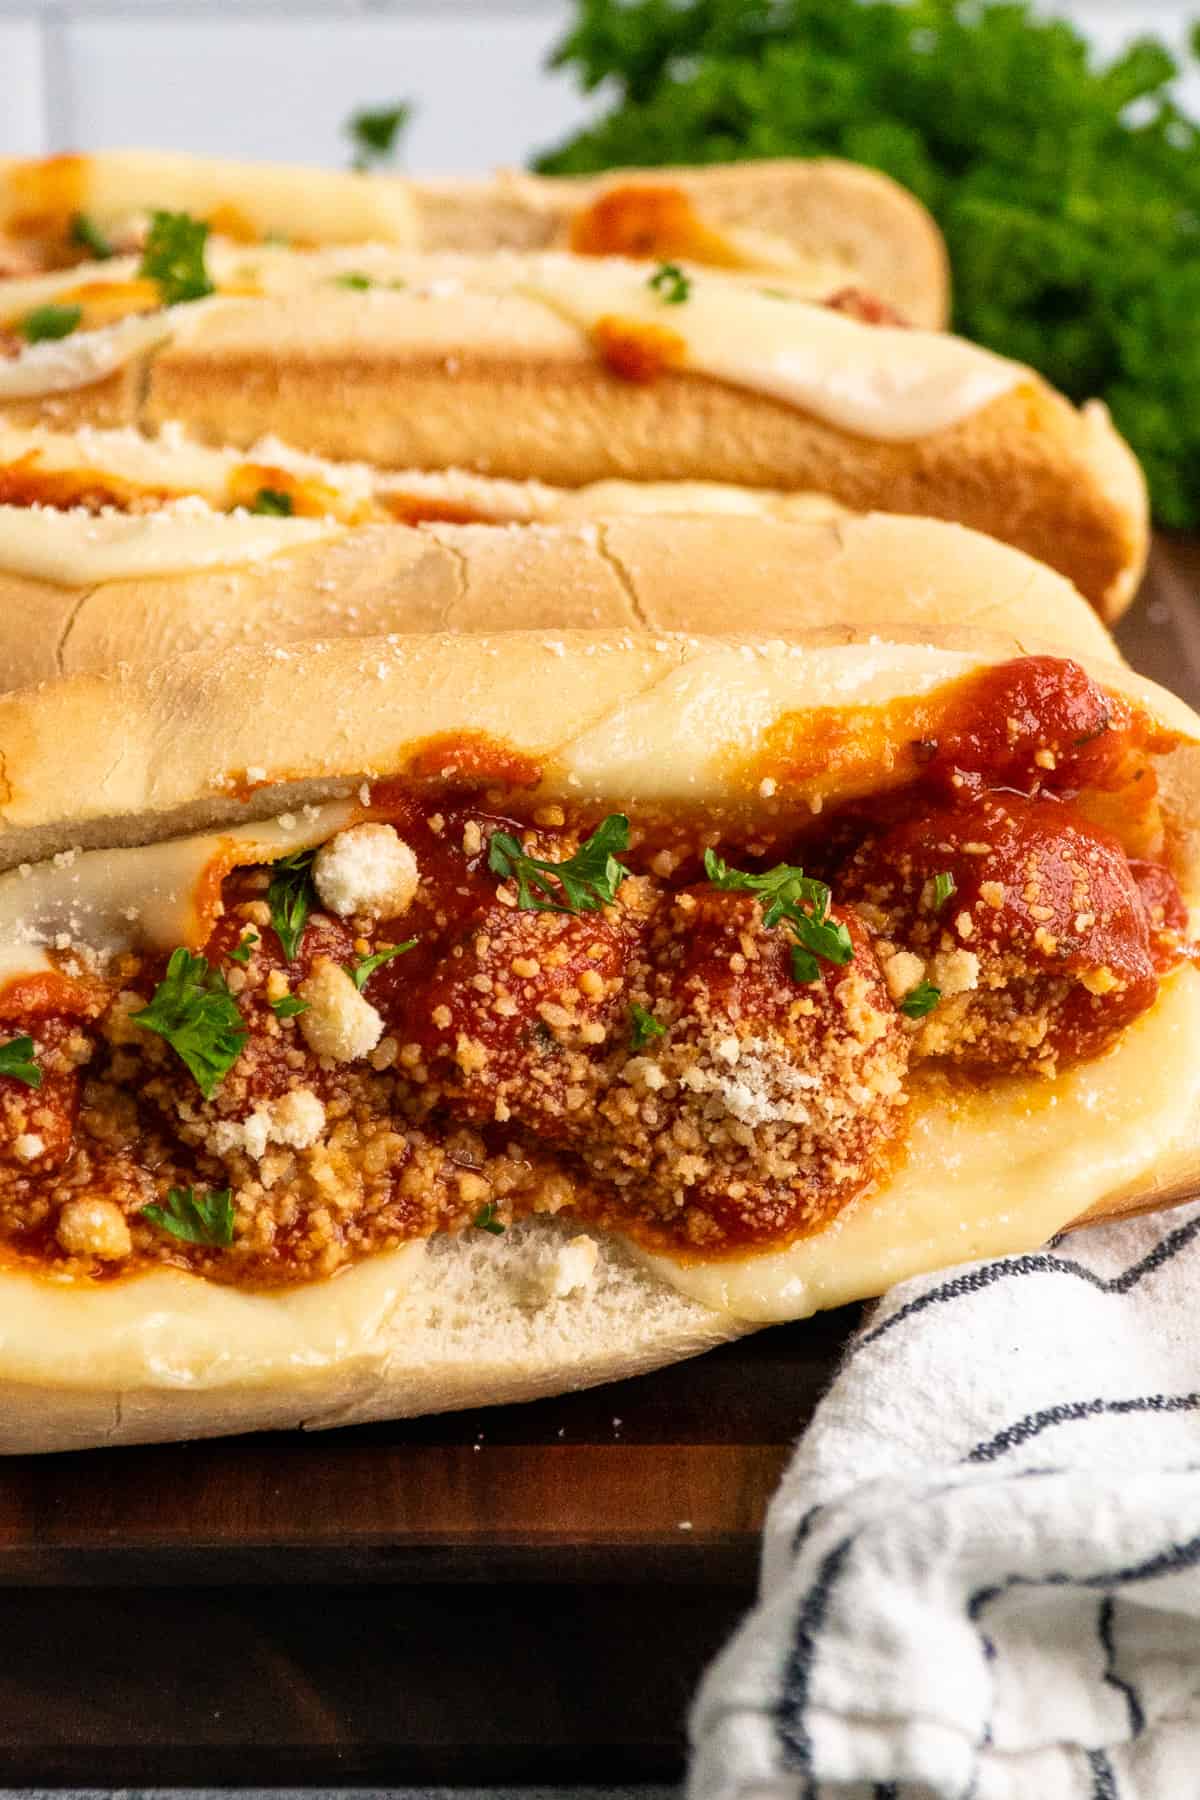 A close up of a meatball sub on its side.